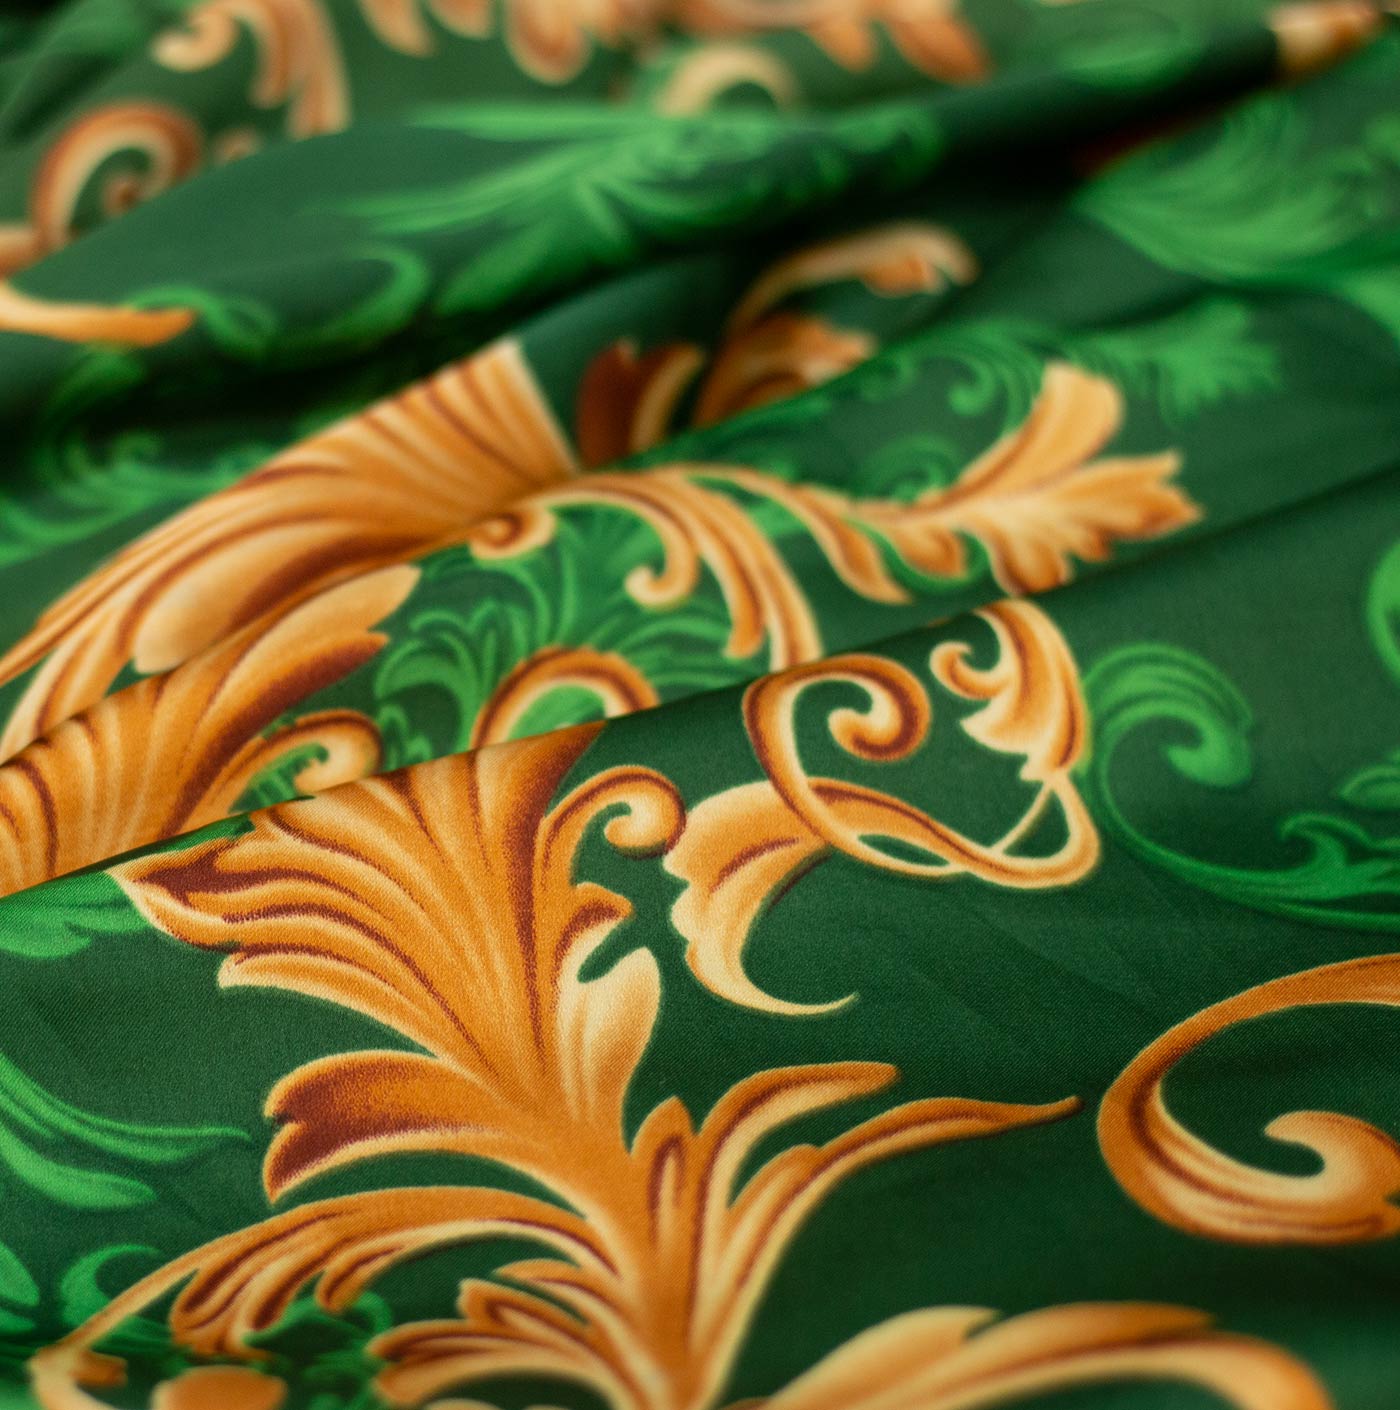 Green and Gold Fire Floral Printed Silk Fabric